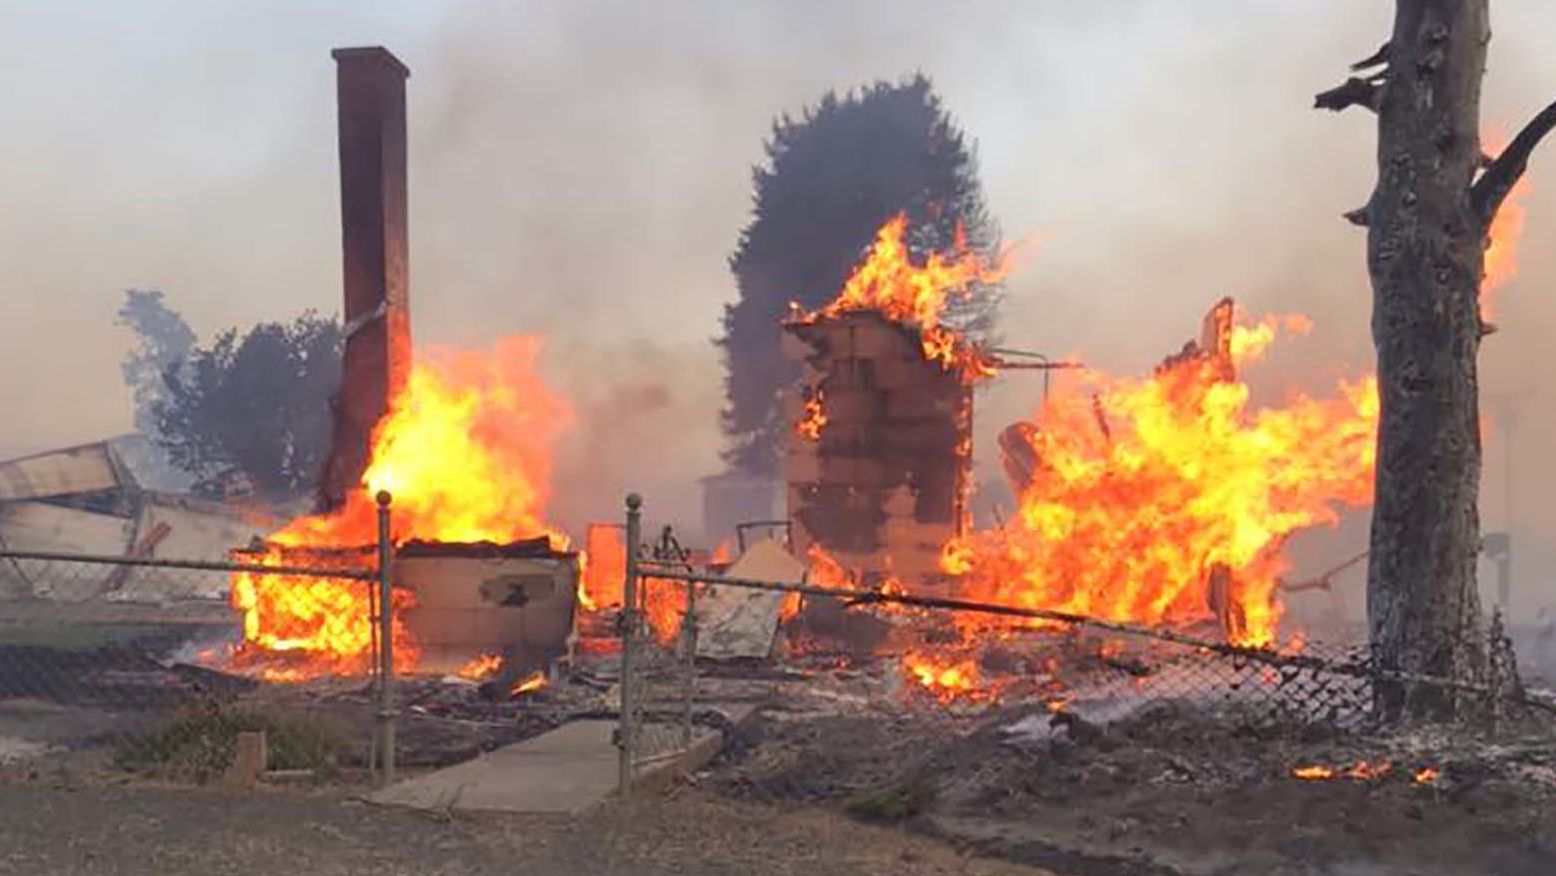 Fire eats through a building in Malden, Washington, this photo posted by the Whitman County Sheriff's Office shows.